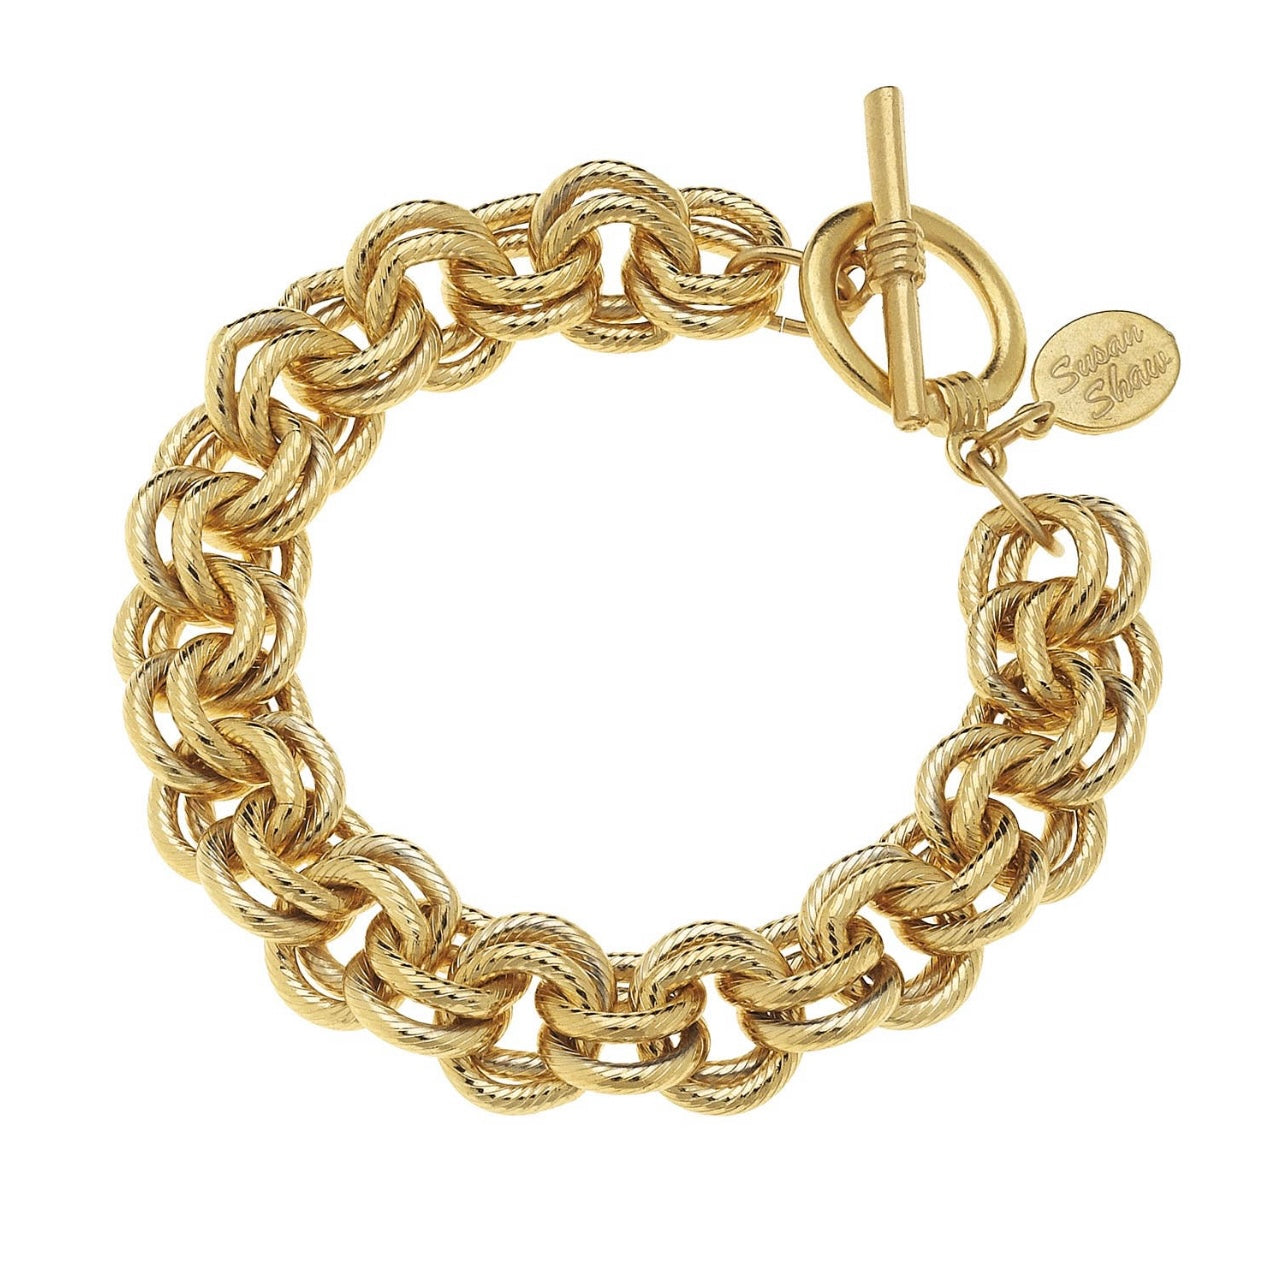 Gold Double Link Chain Bracelet by Susan Shaw